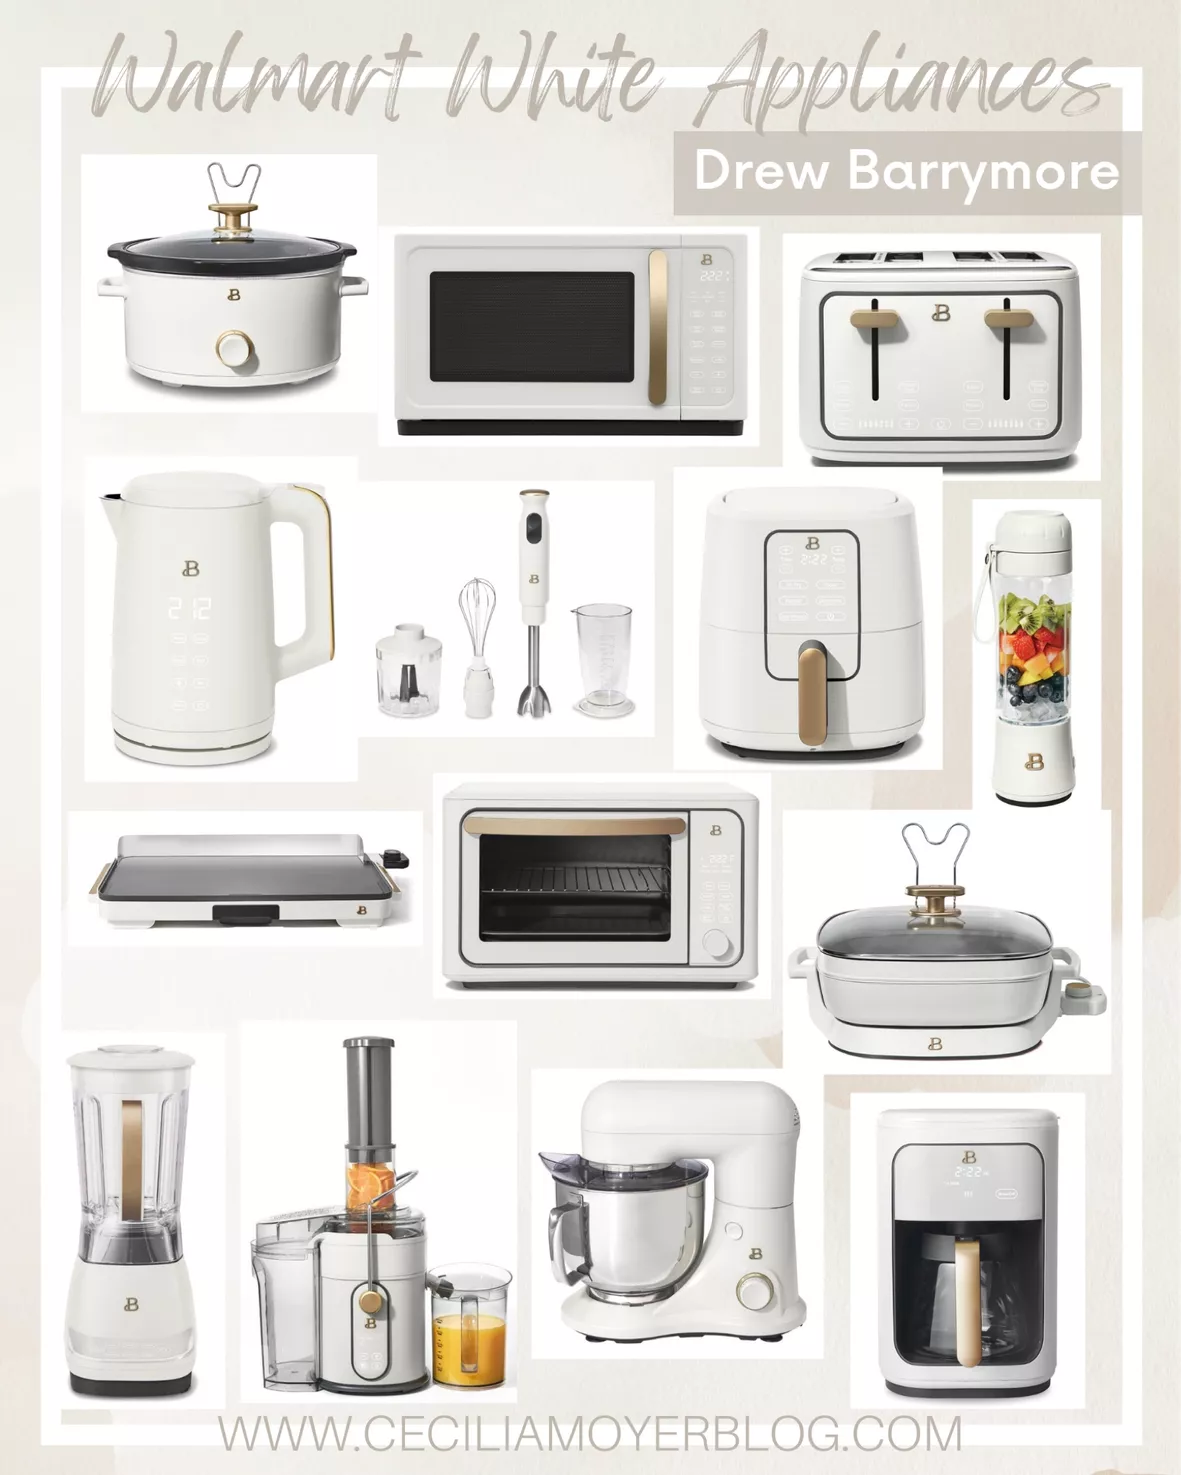 DREW BARRYMORE APPLIANCES AT WALMART - TOASTER AND IMMERSION